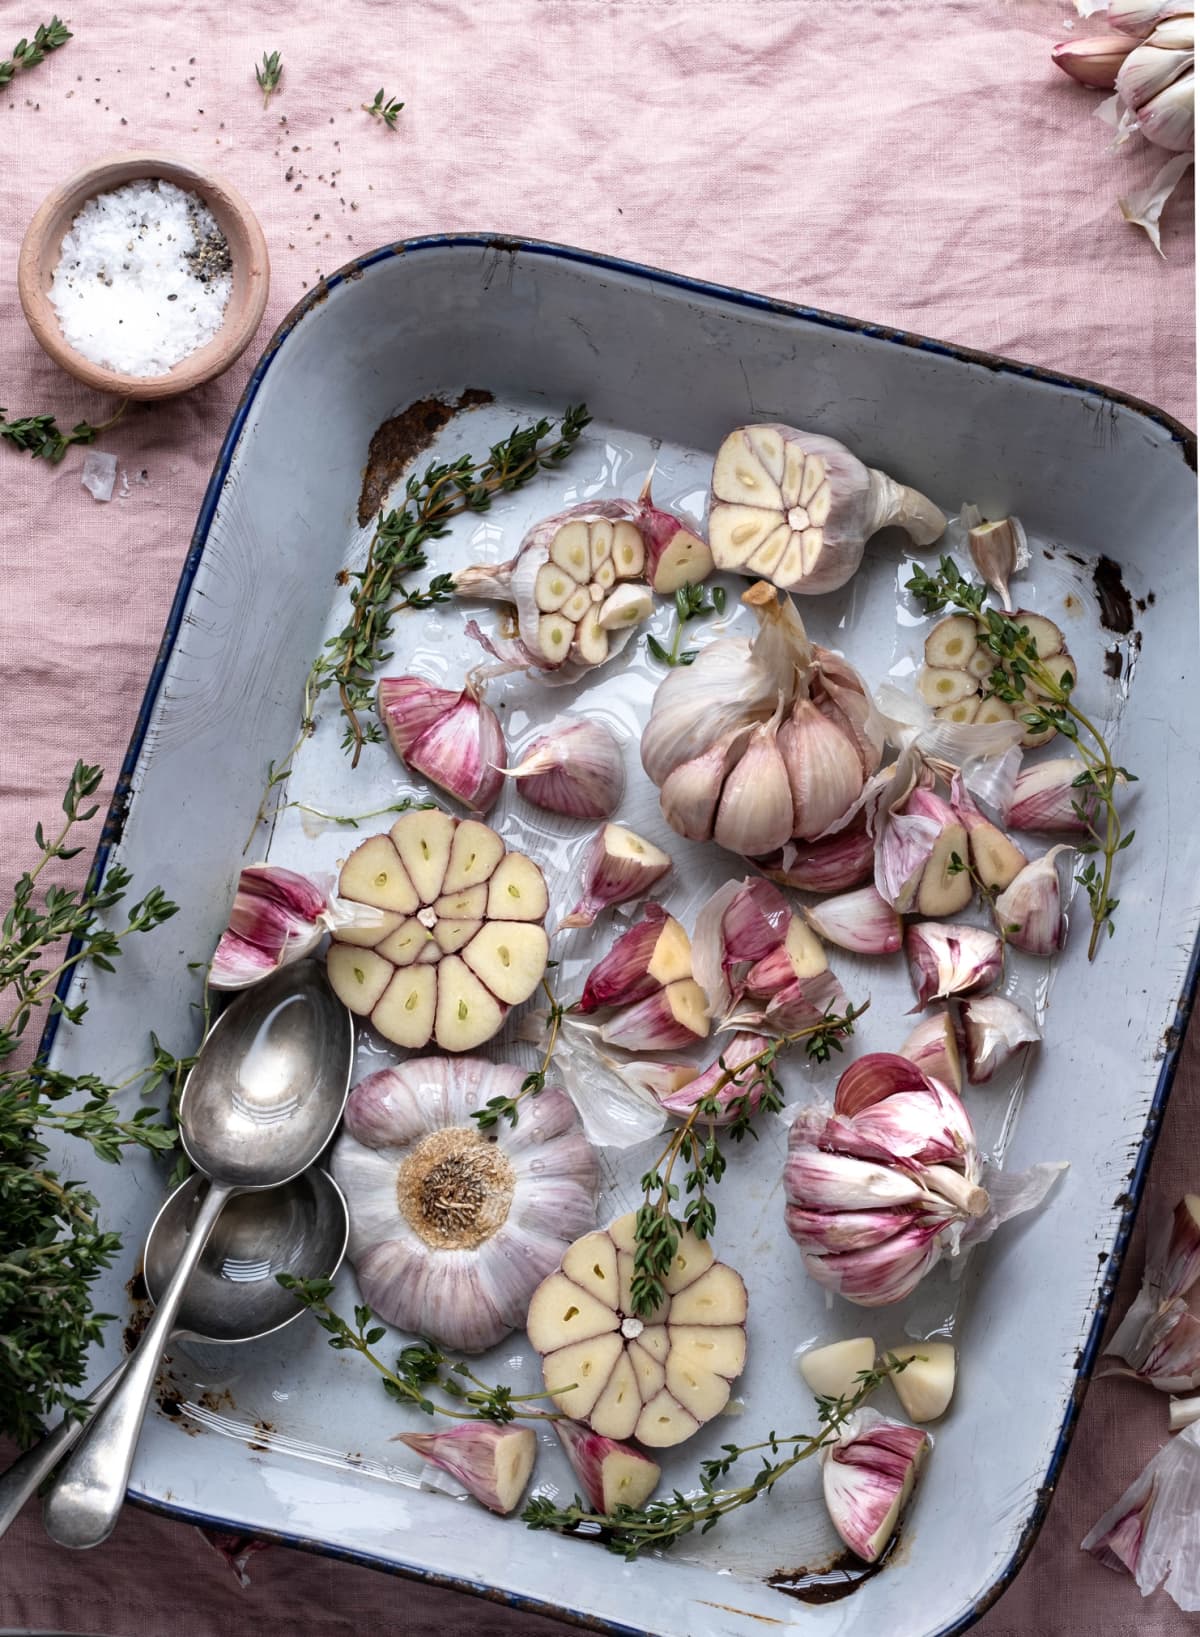 Pink garlic with herbs drizzled with olive oil in a roasting tin.